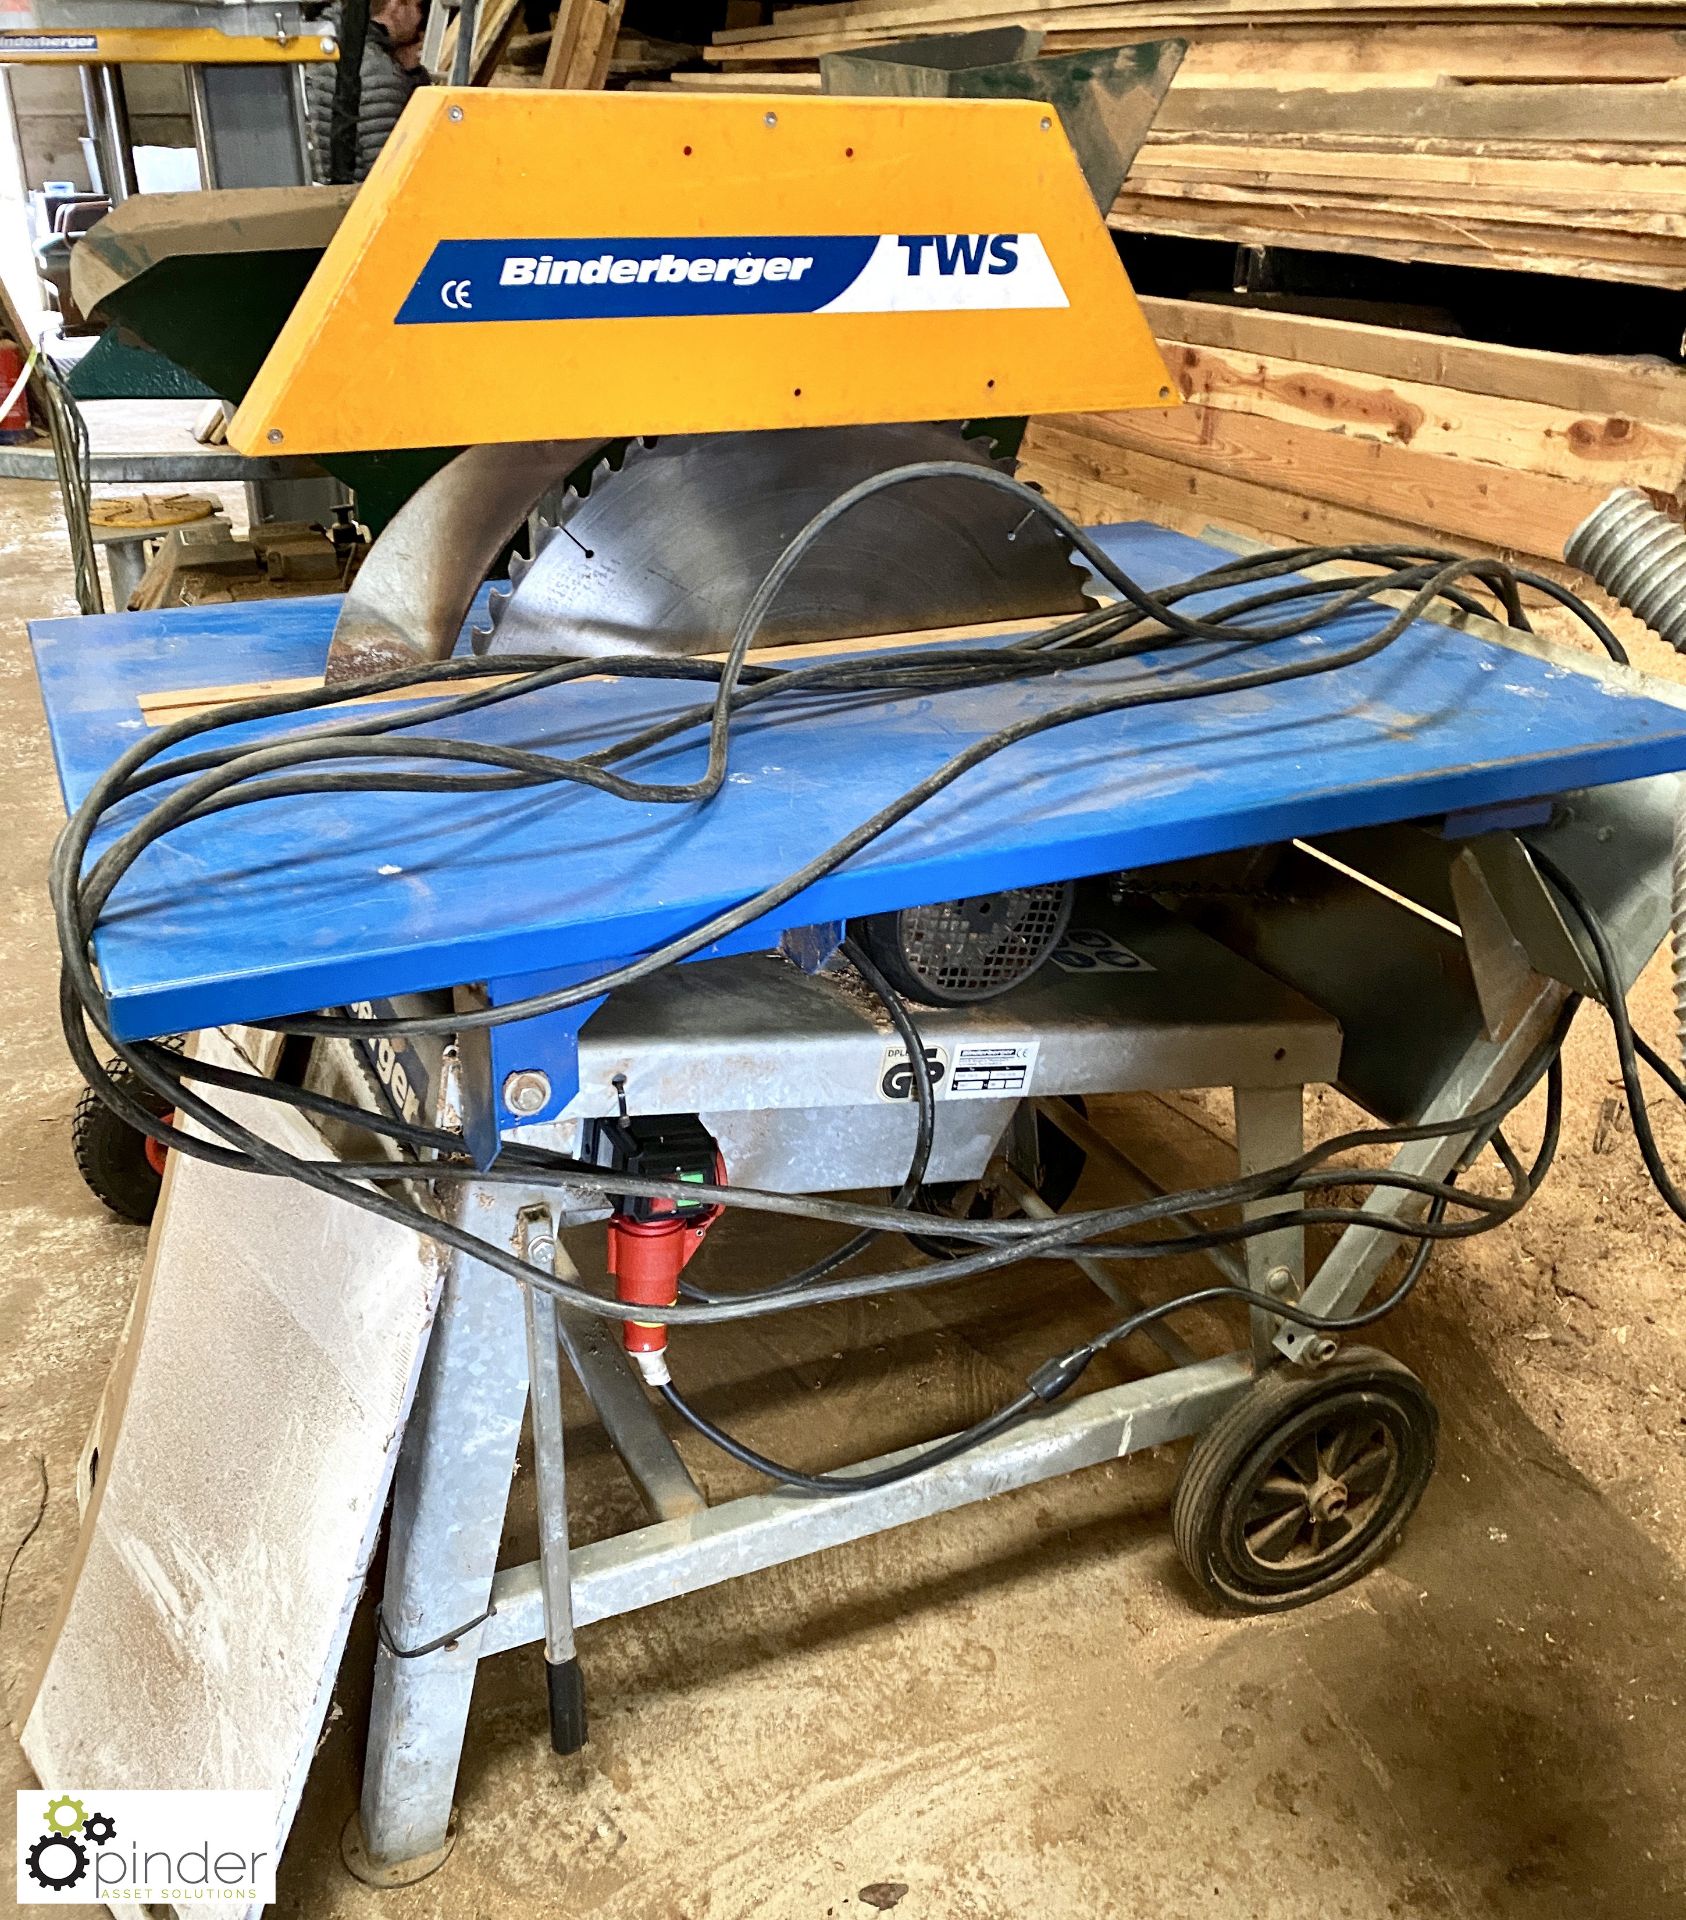 Binderberger TWS 700E mobile Circular Saw Bench, 415volts, with spare used saw blade (motor and - Image 4 of 7